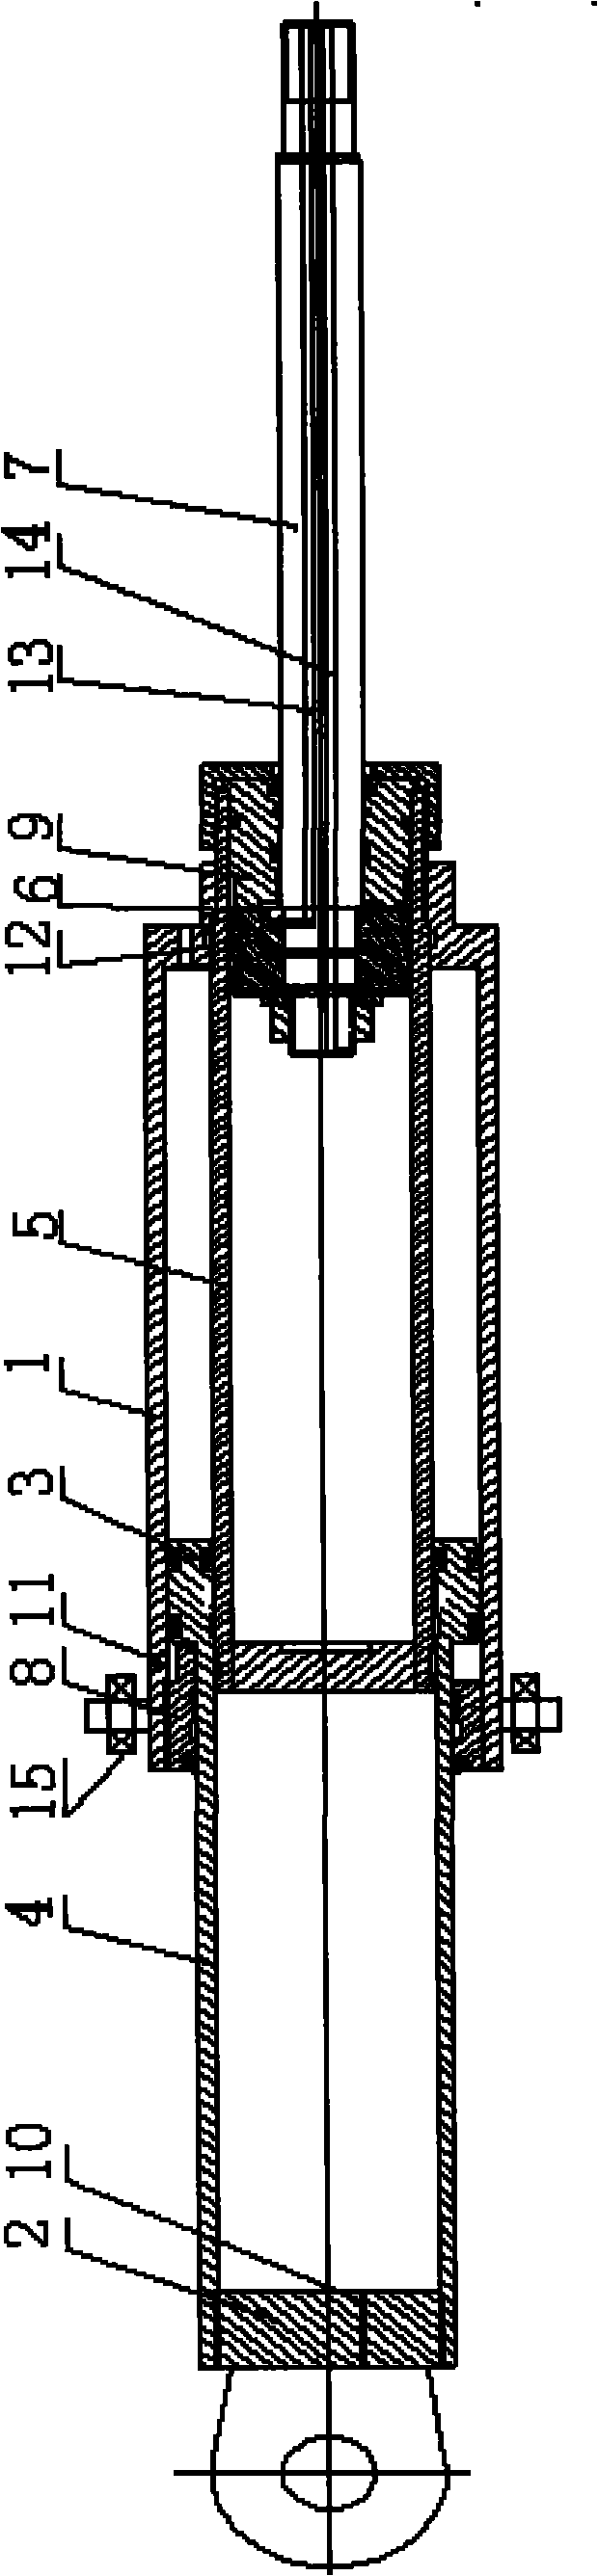 Combined bidirectional long-stroke push-and-pull hydraulic cylinder